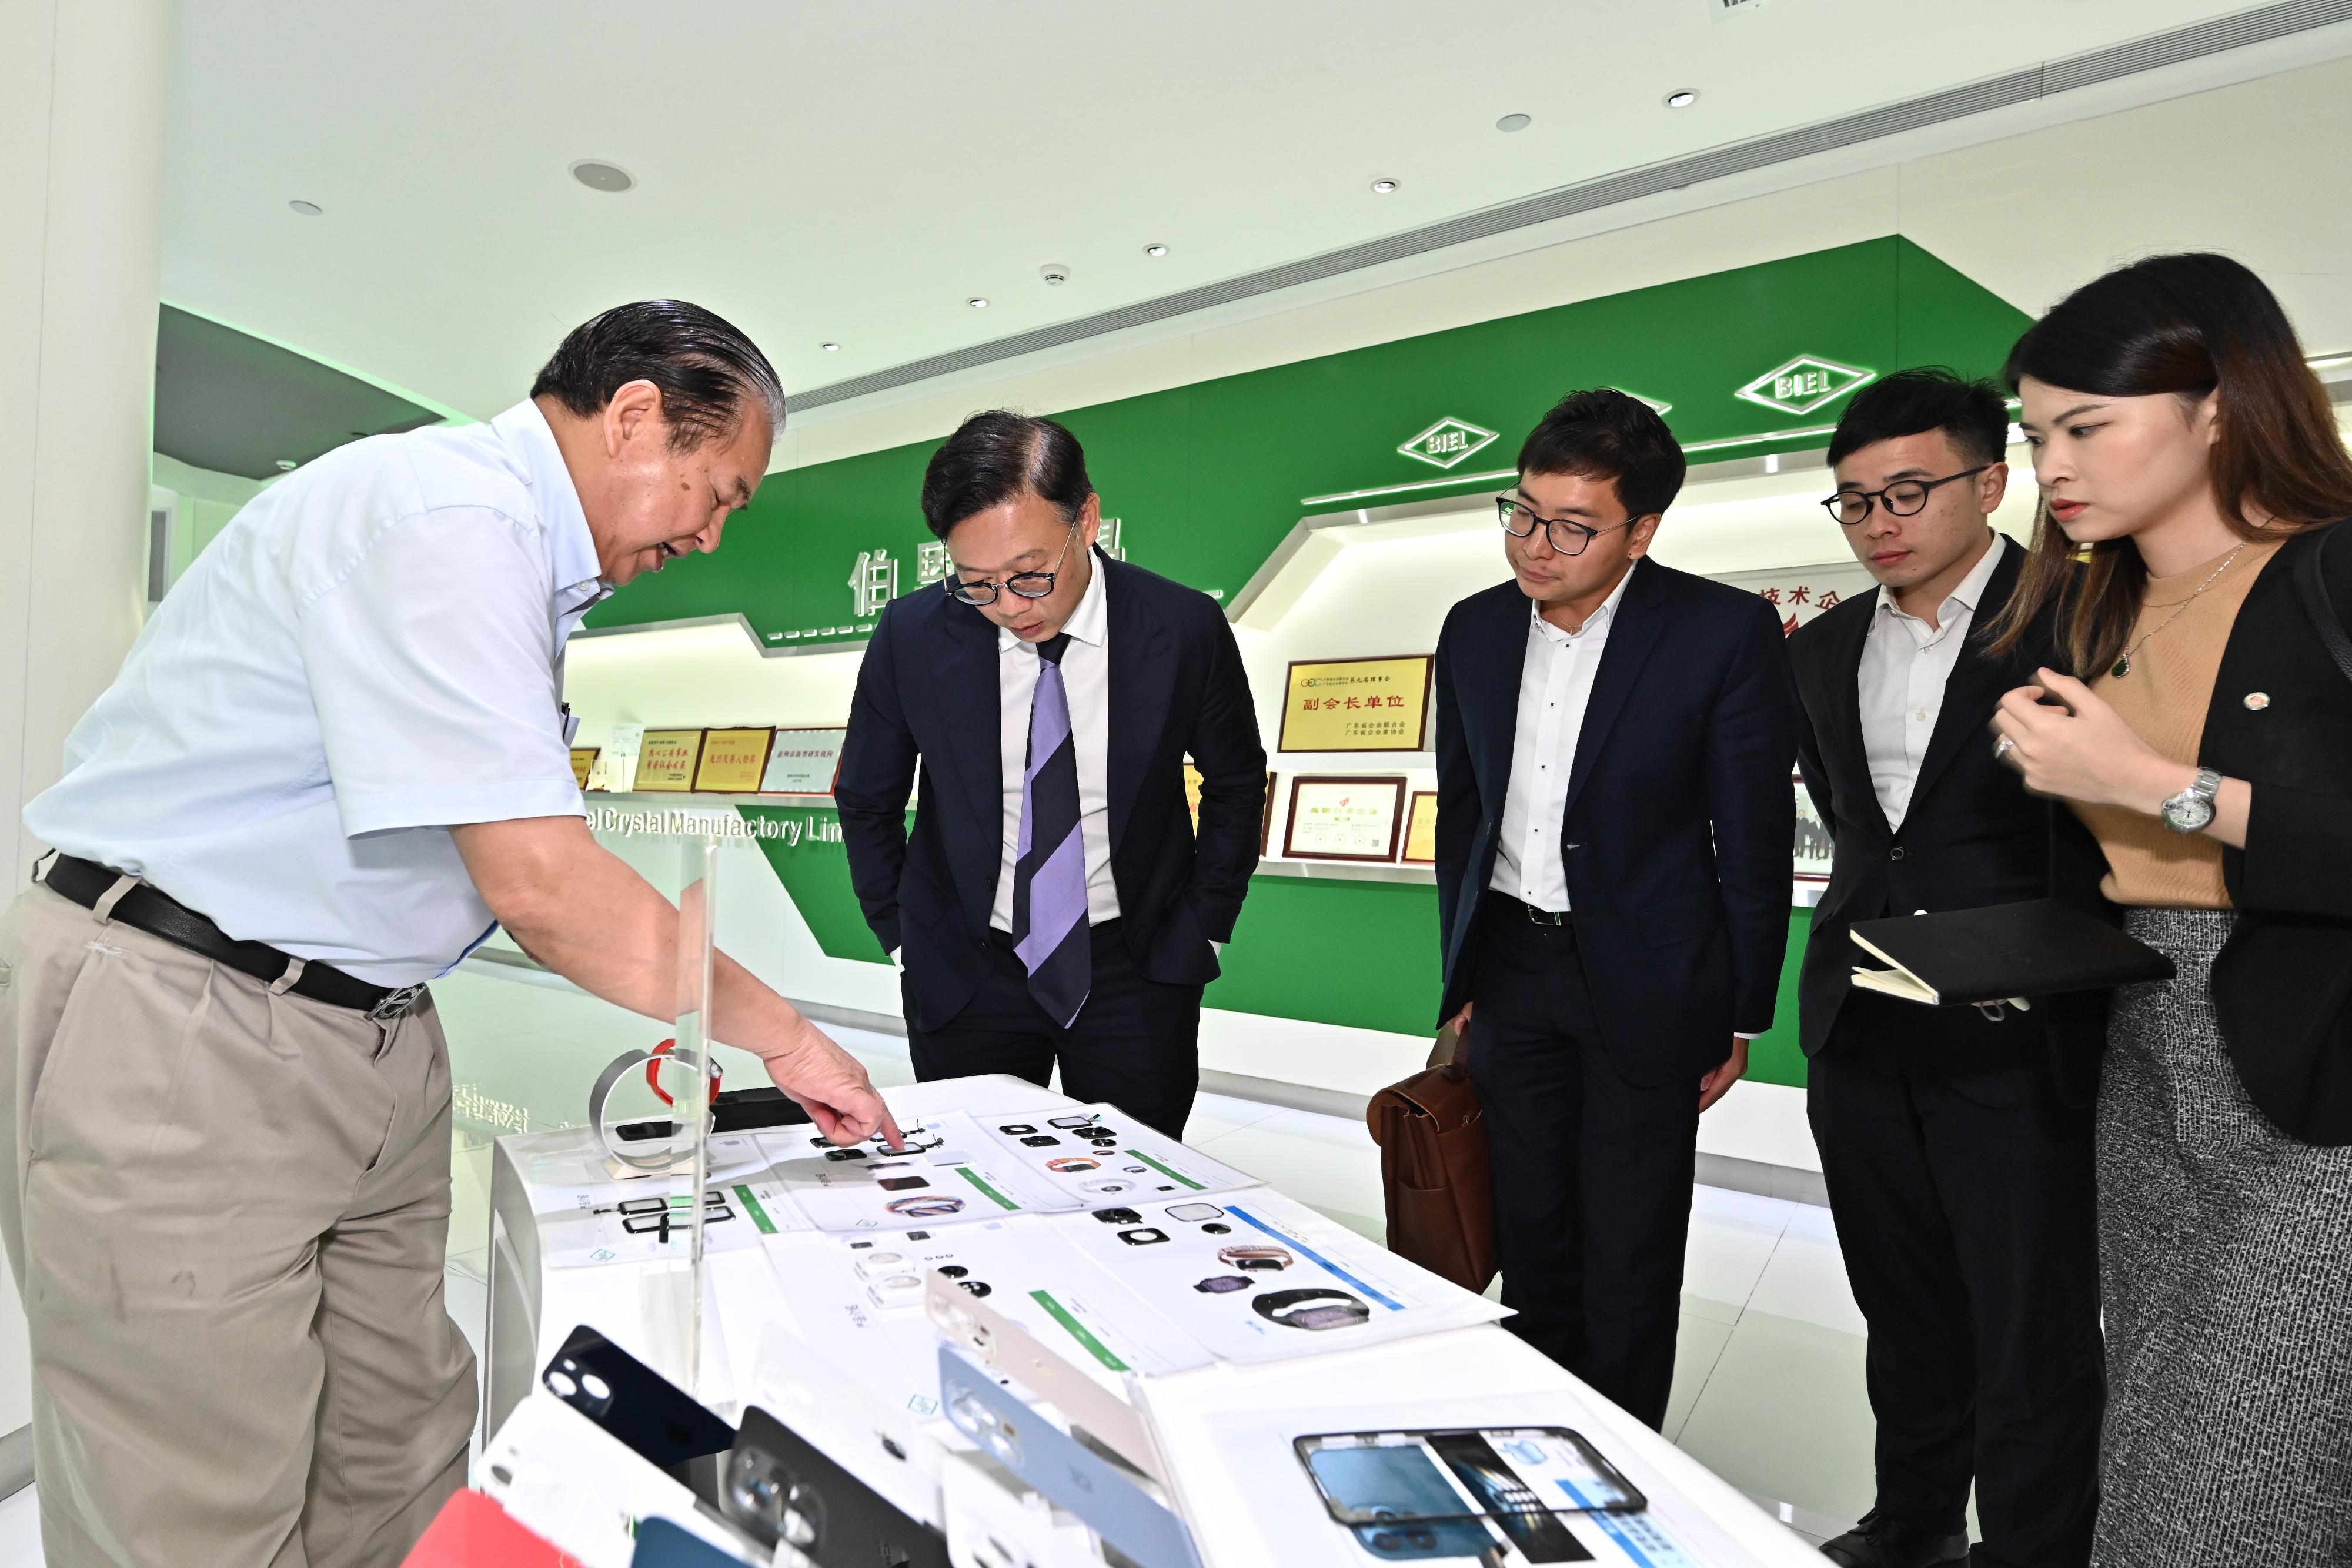 The Deputy Secretary for Justice, Mr Cheung Kwok-kwan, led a delegation comprising young lawyers and law students to visit Biel Crystal's Science and Technology Park in Huizhou today (September 7). Photo shows Mr Cheung (second left) and members of the delegation being briefed on the latest research and development on touch screen technology.
